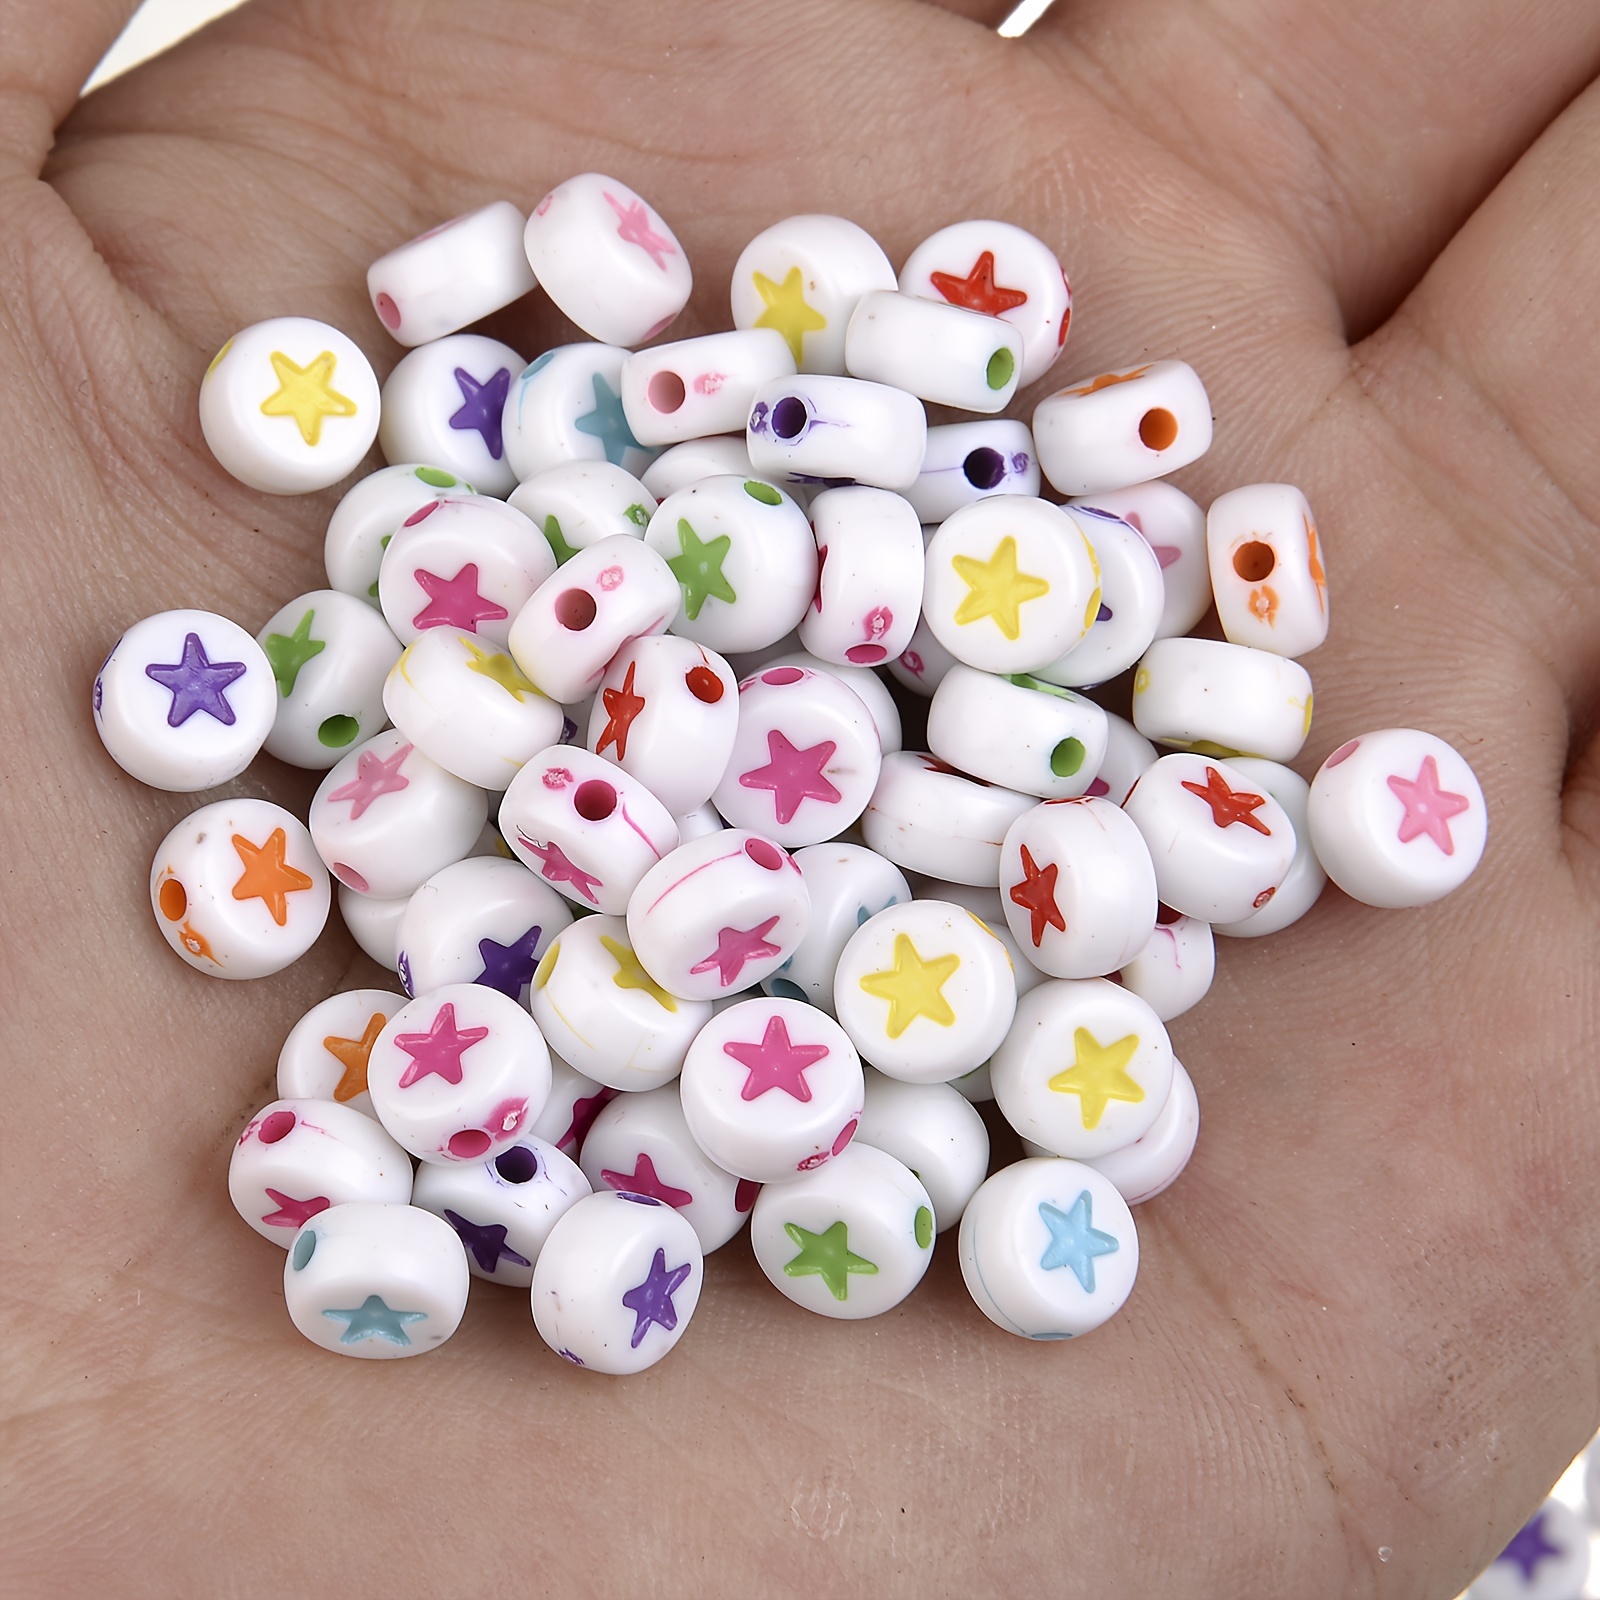 Hollow Wooden Star Beads Multicolor Charms Pendant Jewelry Making Supplies  30pcs